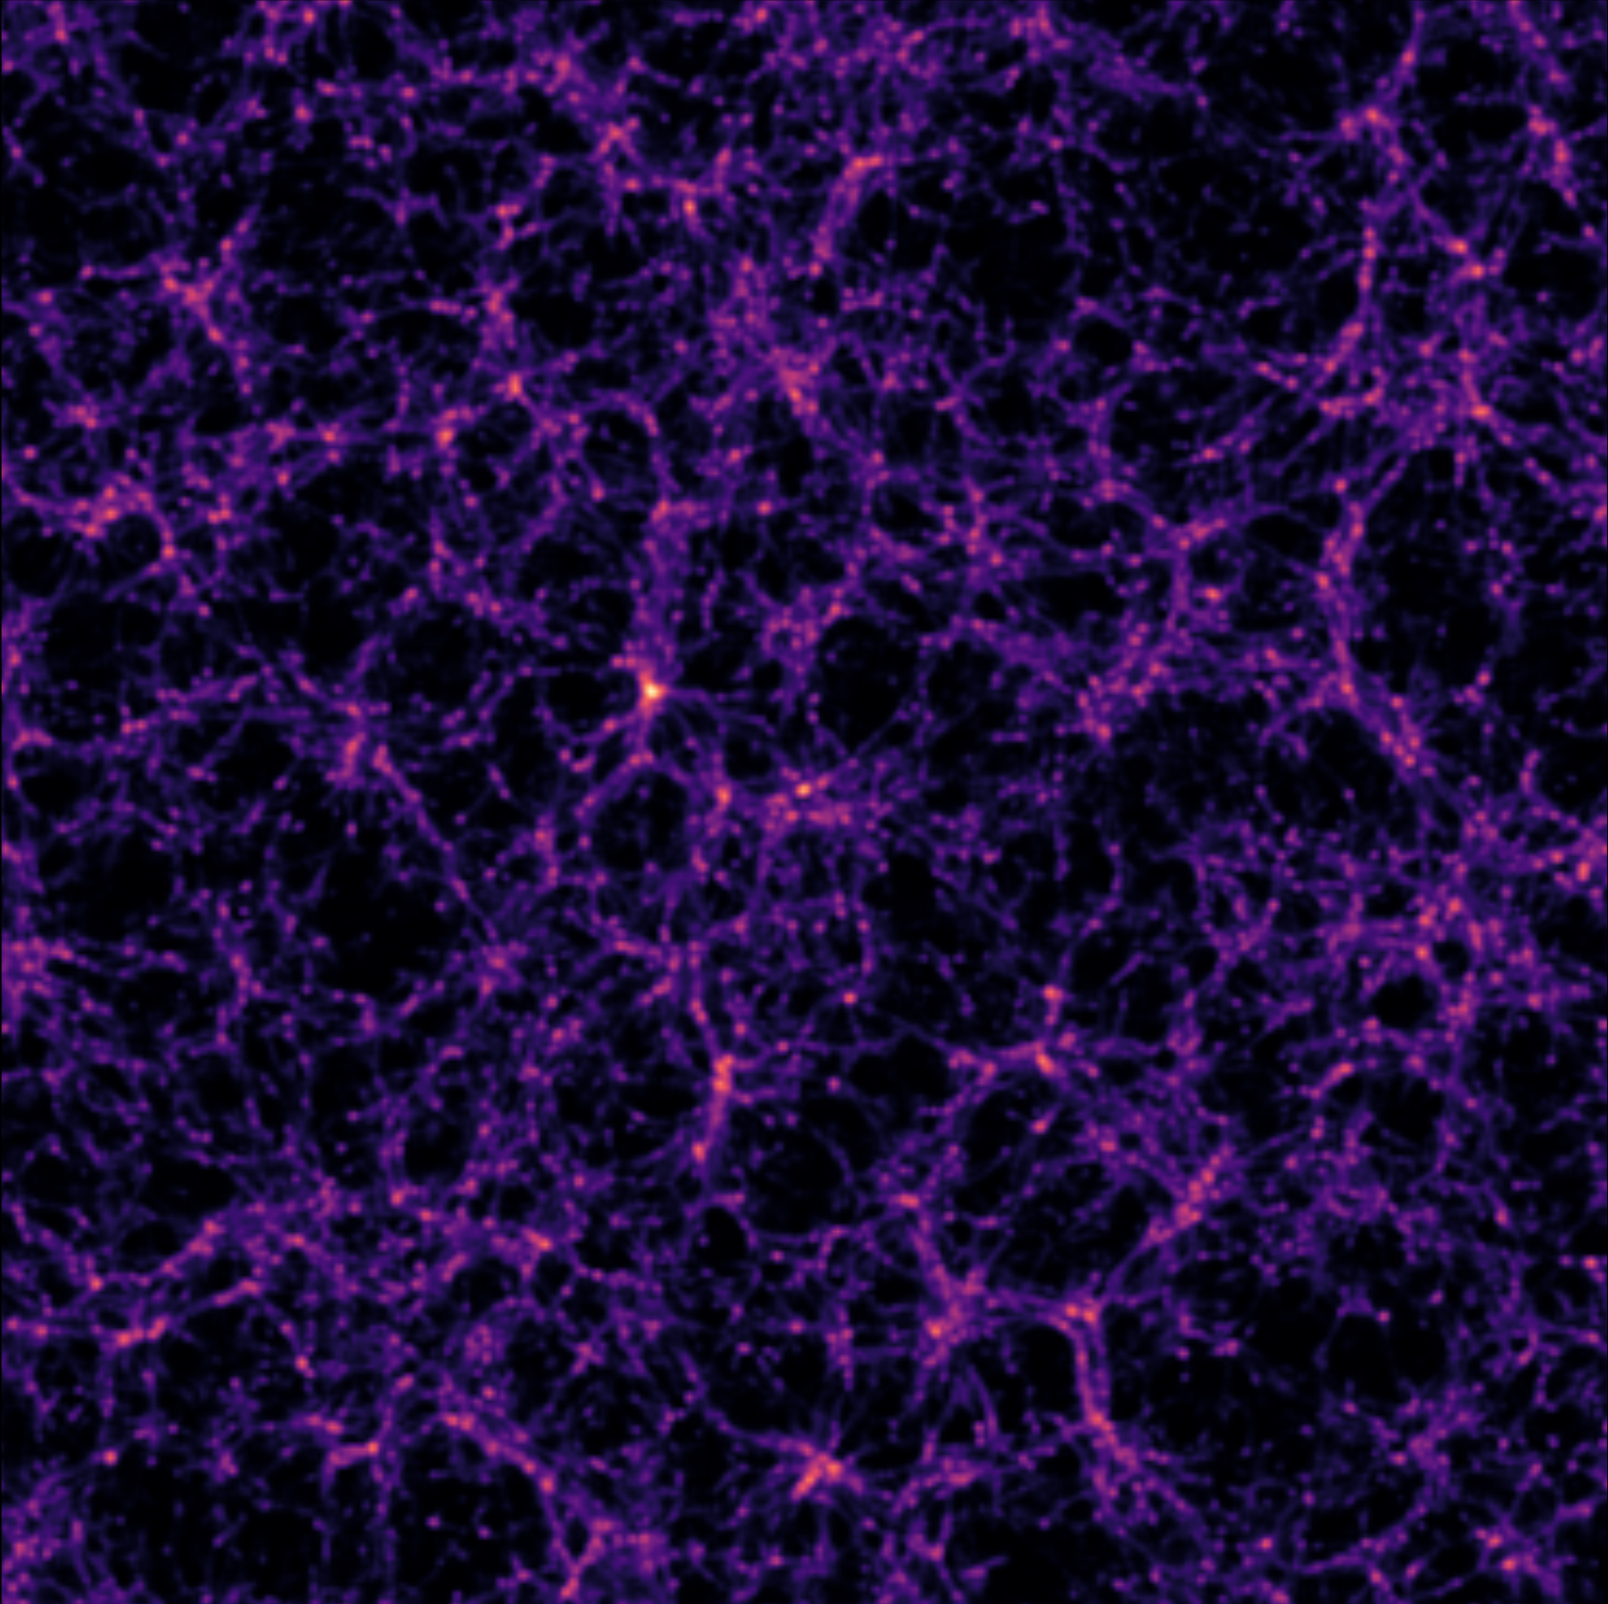 simulation showing cosmic web in purple, red on a dark background